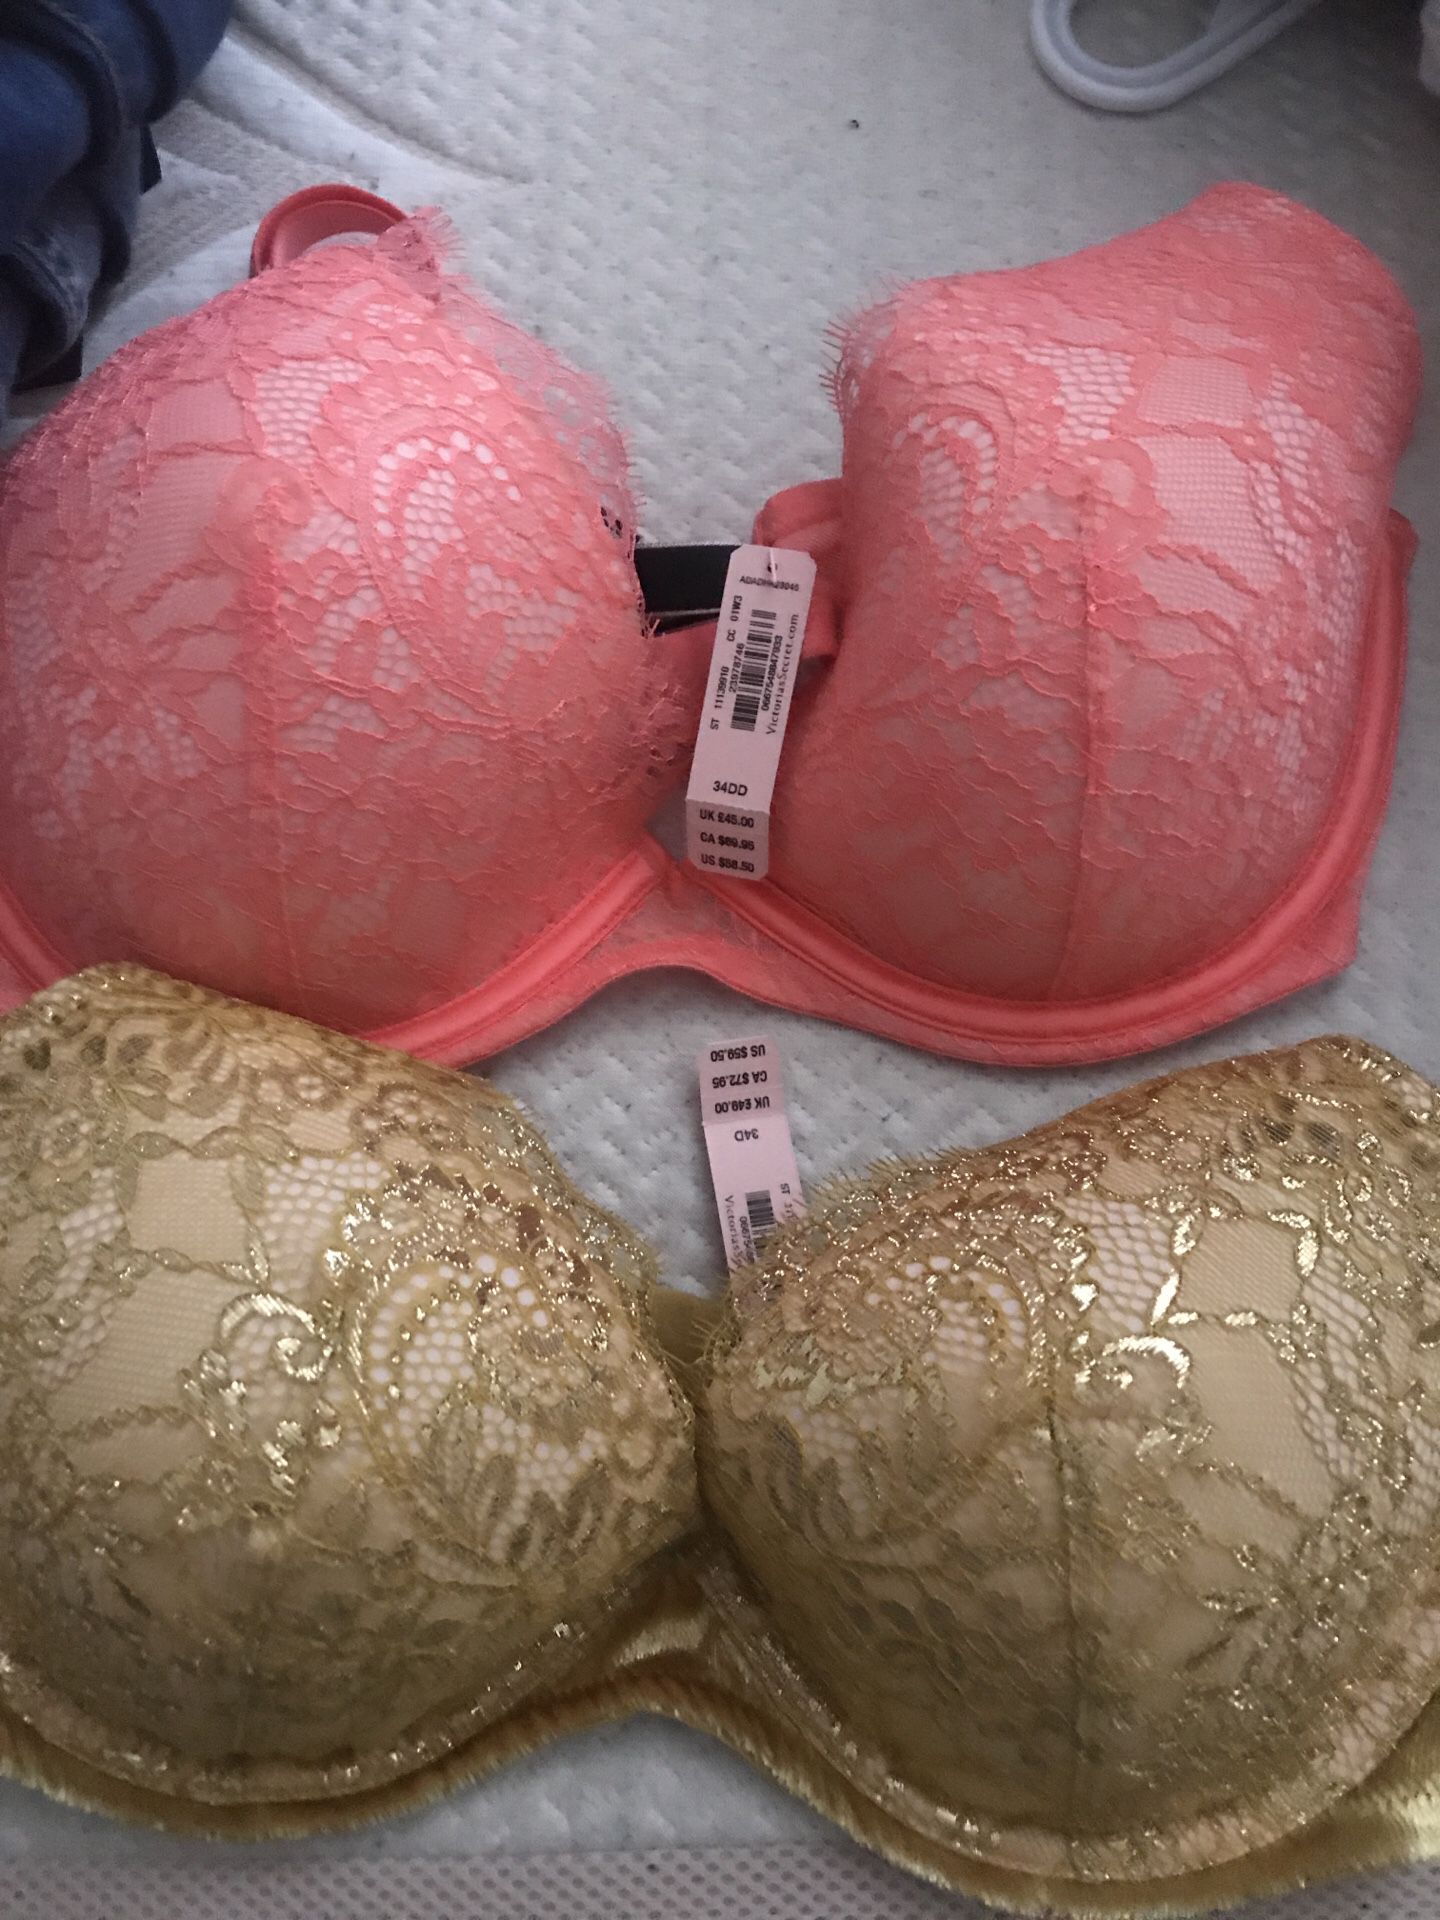 2 brand new Victoria secret bras 34dd with tags for Sale in Elk Grove, CA -  OfferUp